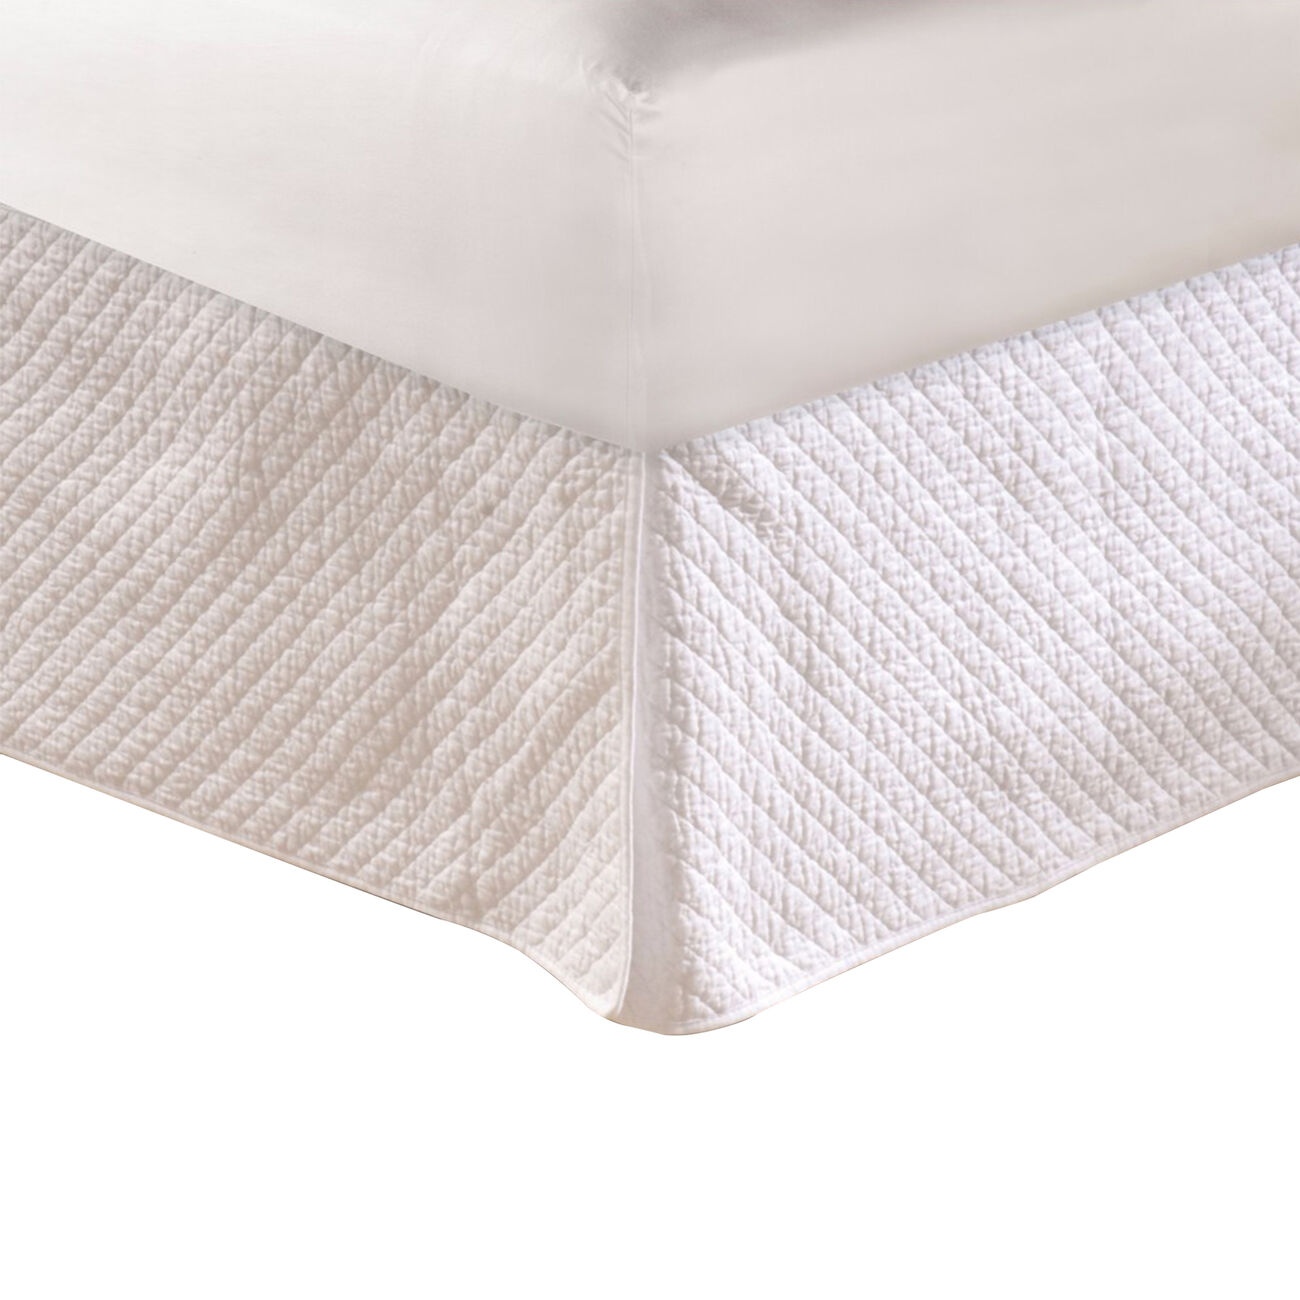 Fraser Fabric King Bed Skirt with Diamond Stitching and Liner, White